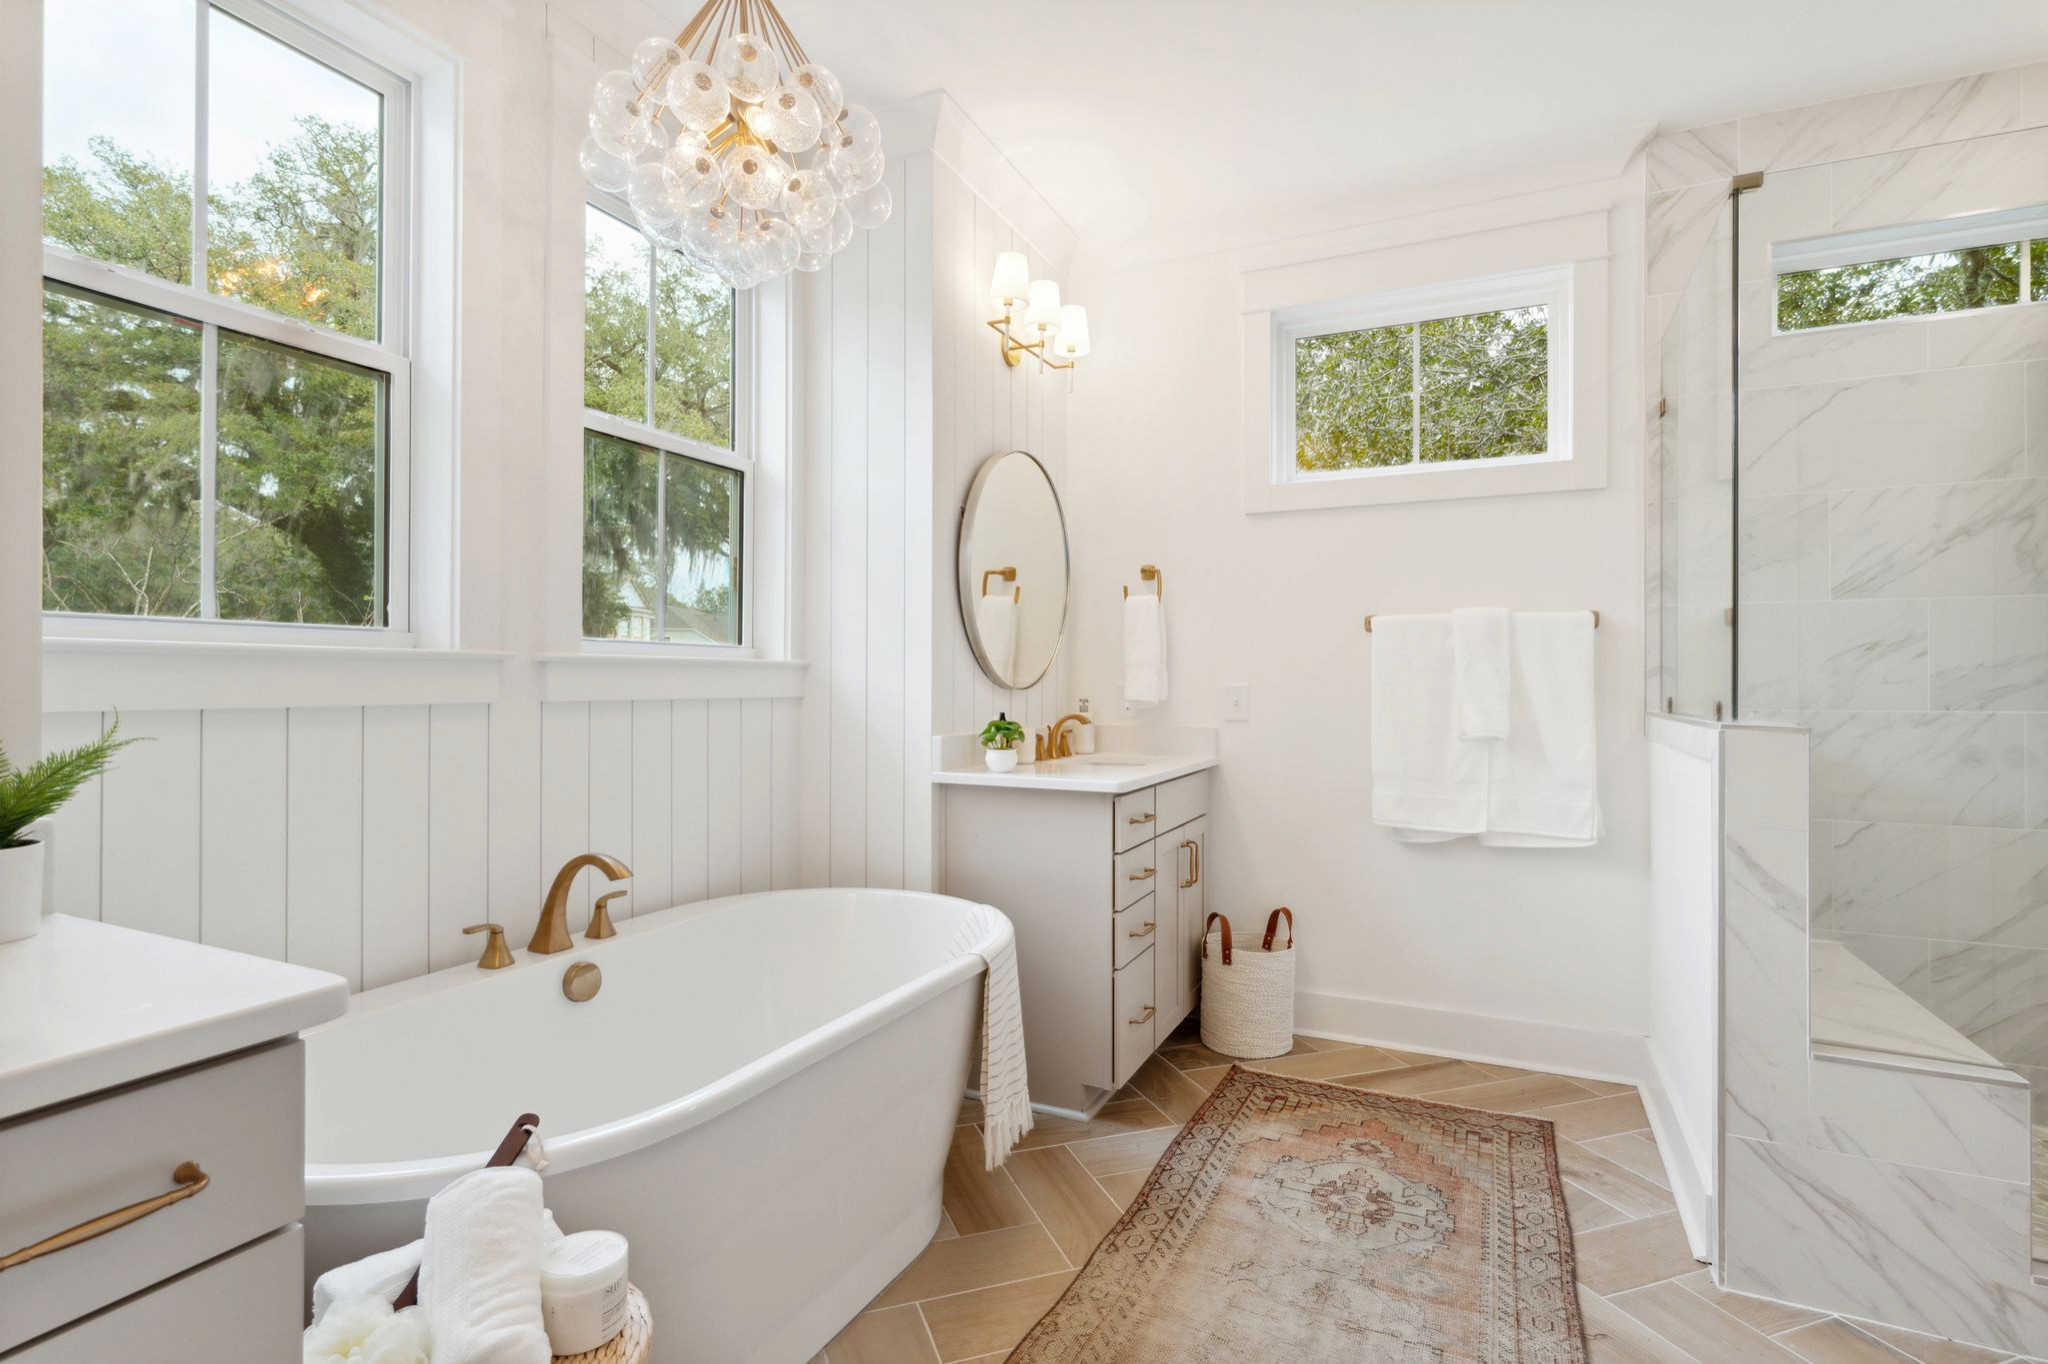 17 Transitional Bathroom Designs: A Blend of Traditional and Modern Styles